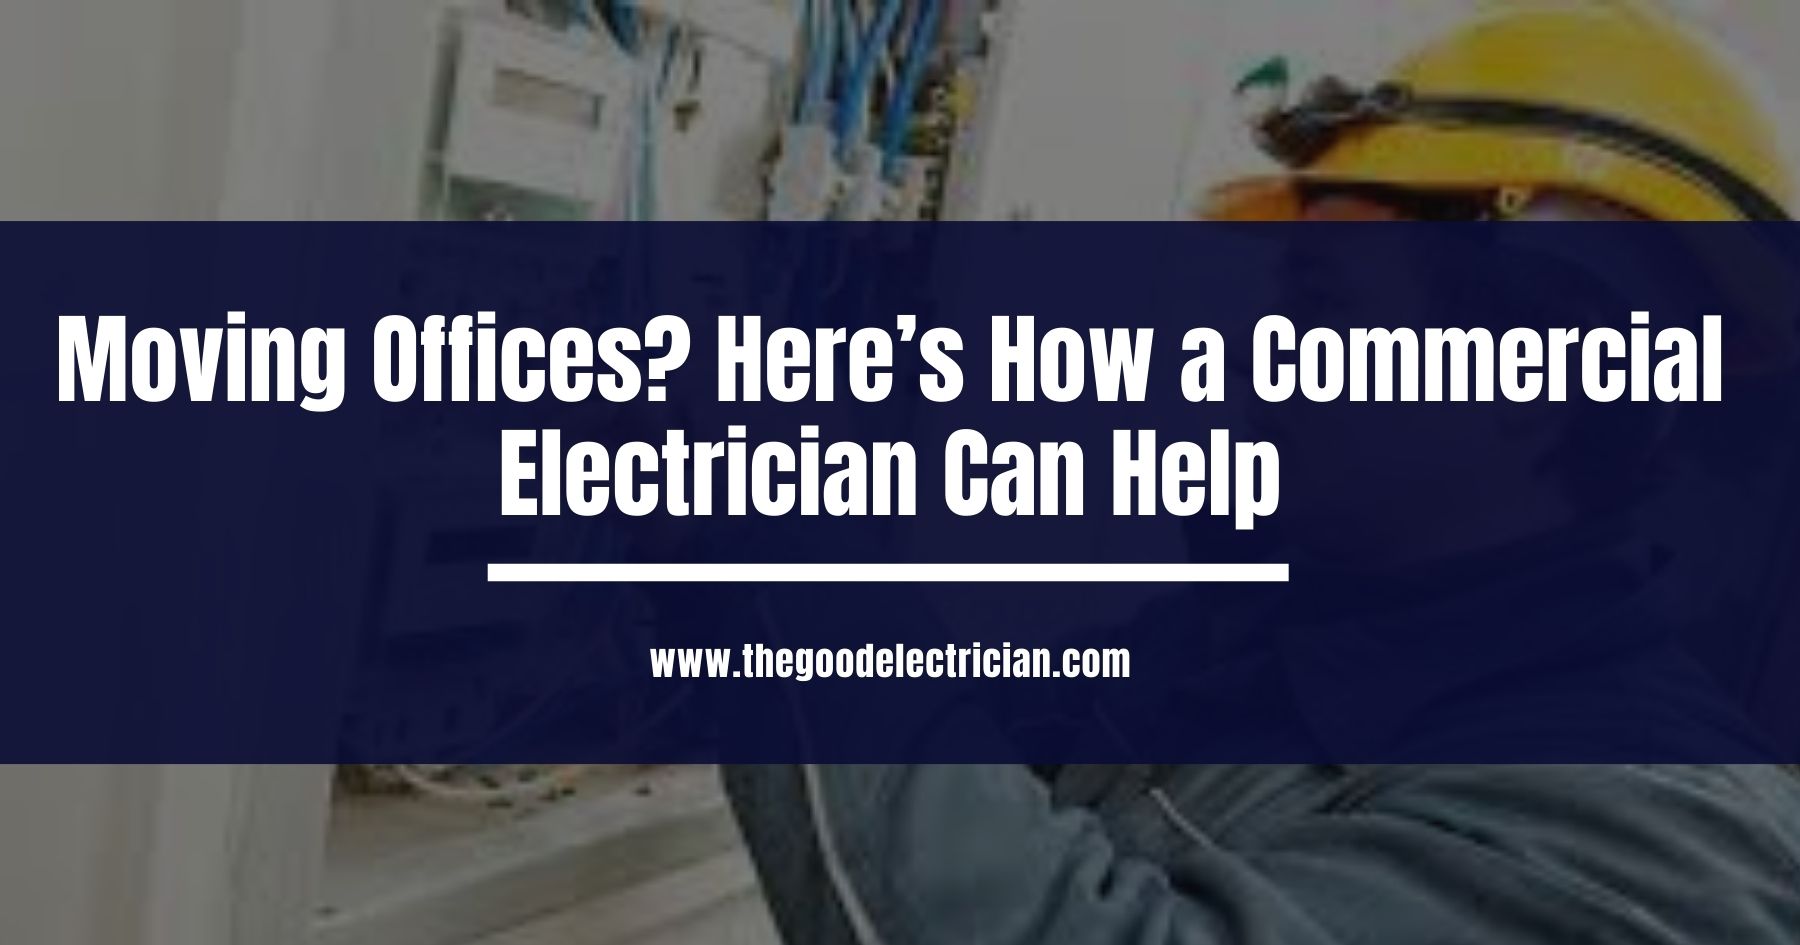 You are currently viewing Moving Offices? Here’s How a Commercial Electrician Can Help